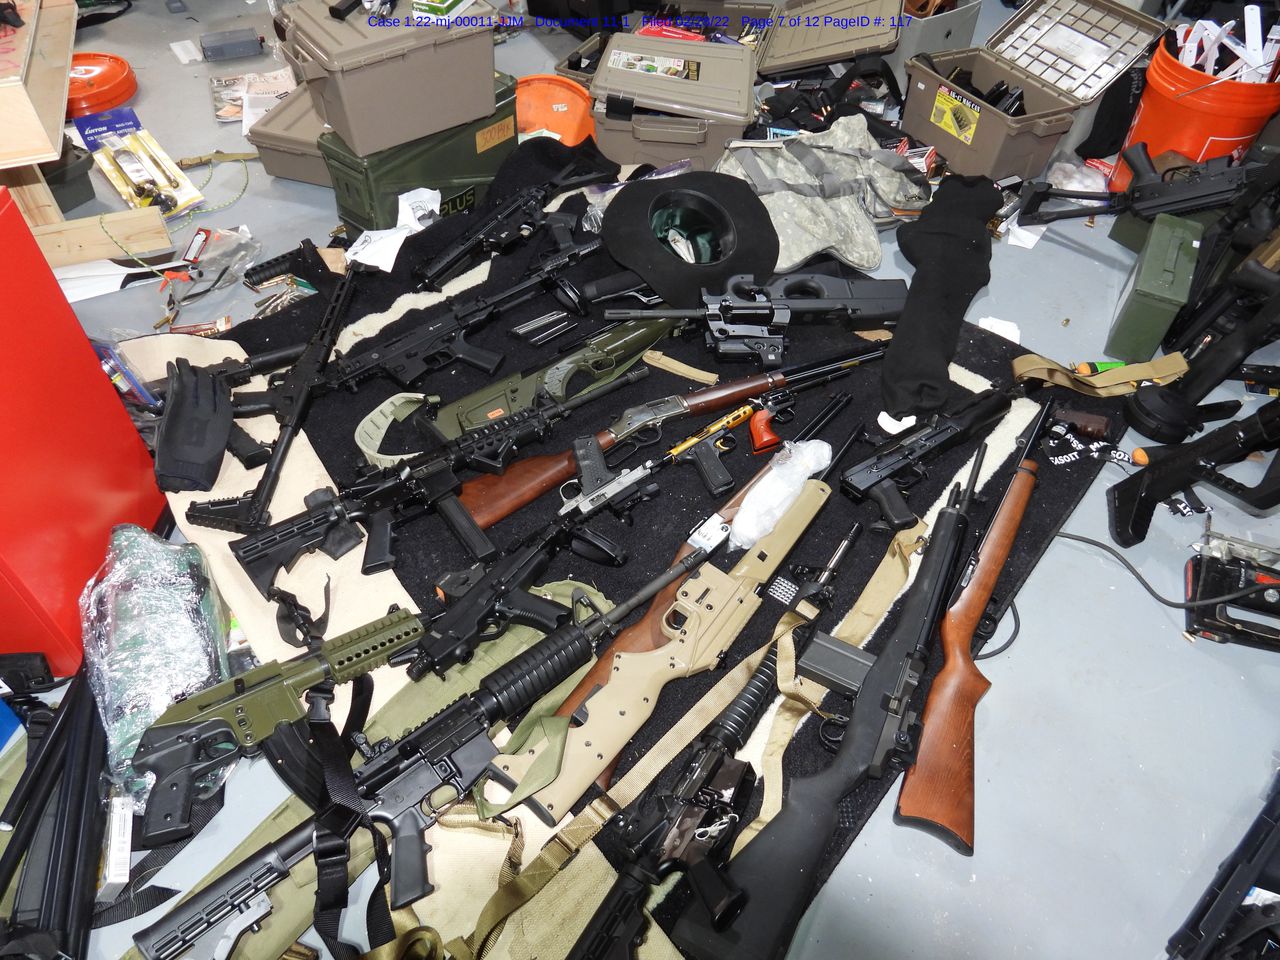 Arsenal in Burrillville included many military-style assault weapons